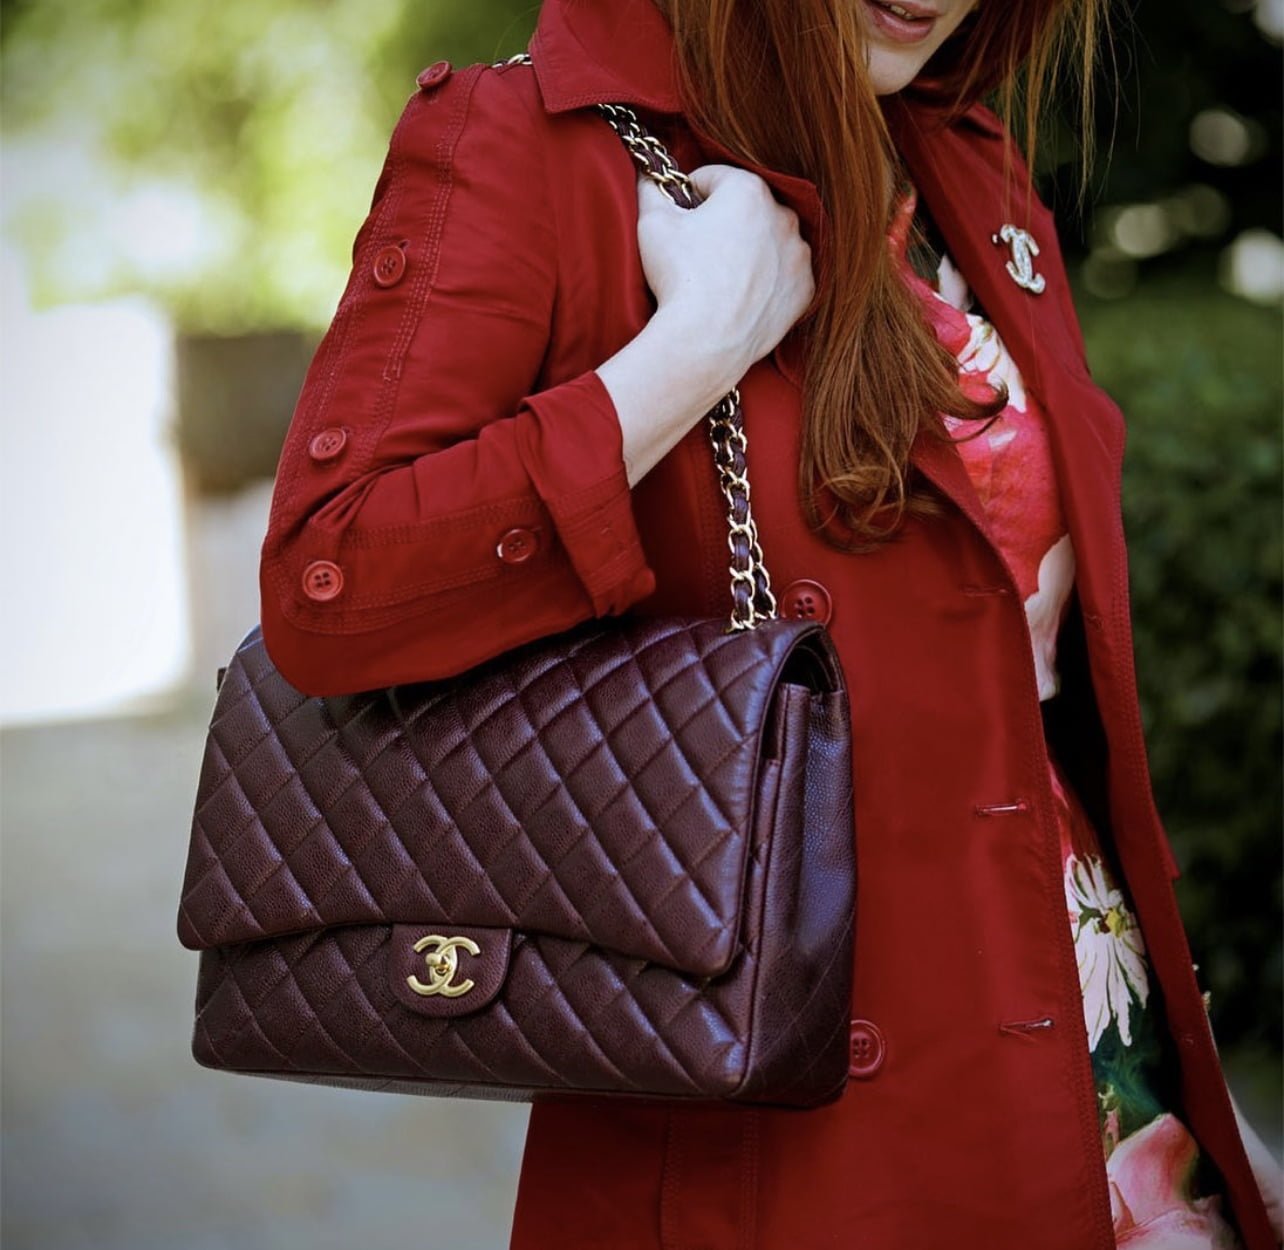 5 Ways to Wear Your Chanel Classic FLap Bag like a Parisian